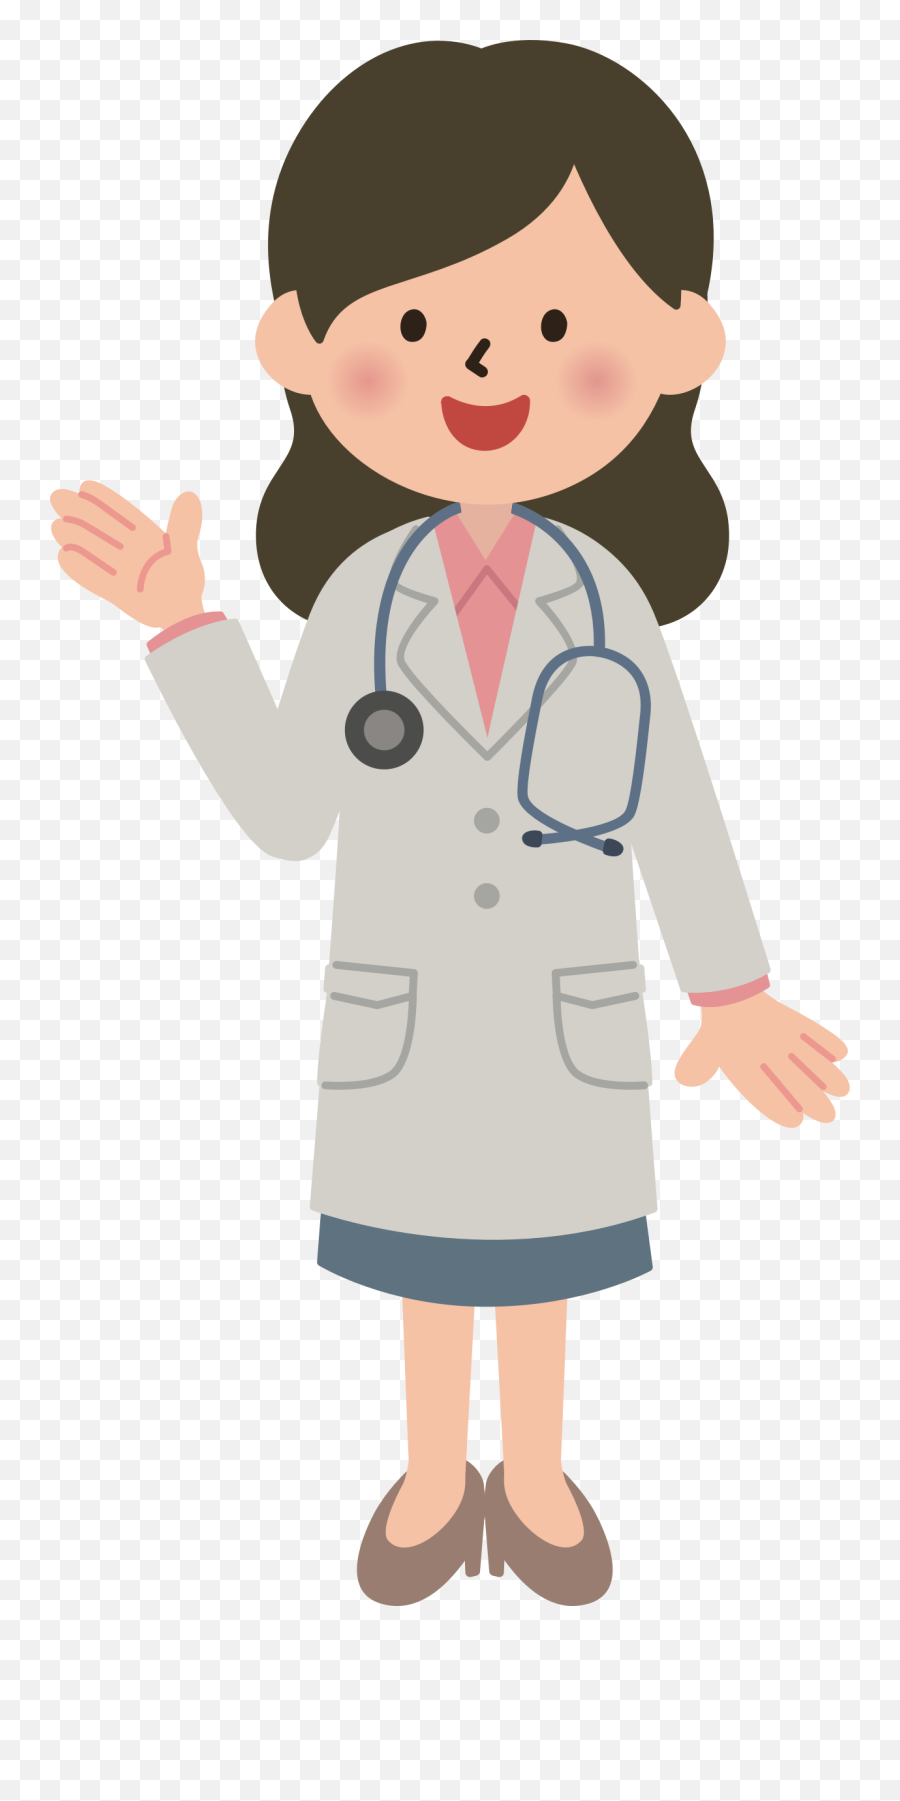 Openclipart - Clipping Culture Doctor Clipart Transparent Background Emoji,Stethoscope Clipart